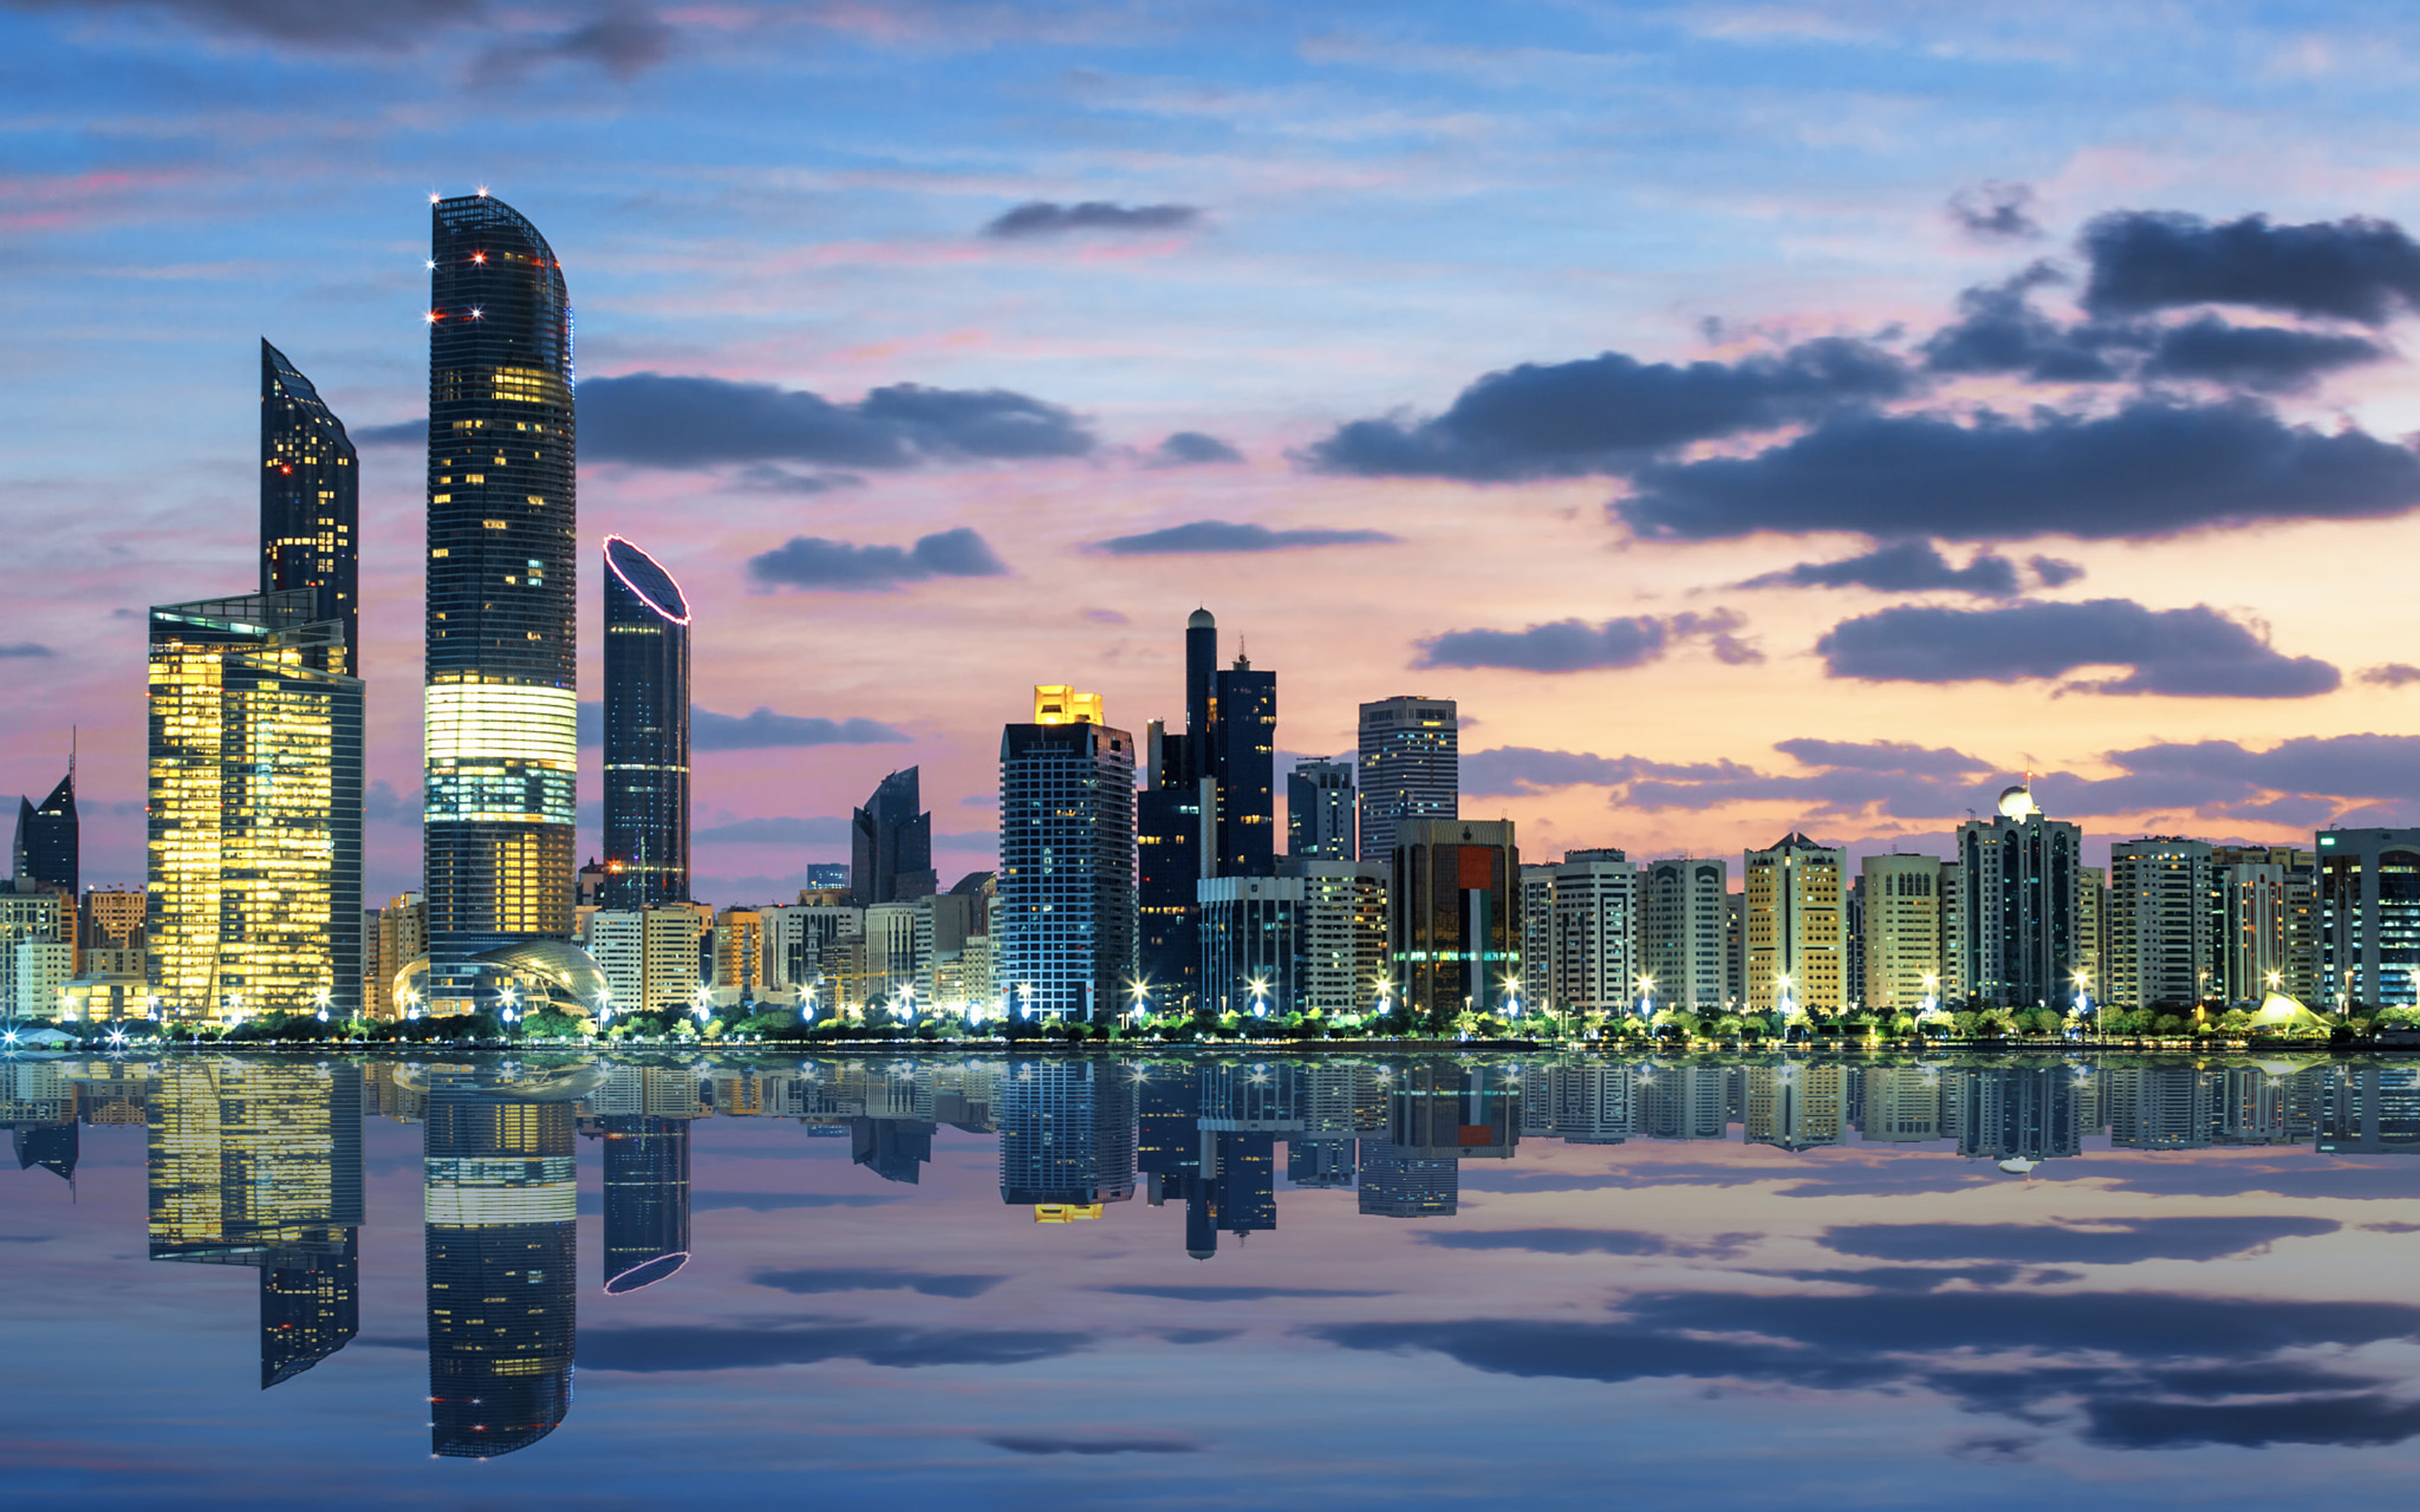 Abu dhabi at sunset capital of the united arab emirates hd wallpapers for desktop tablets and mobile phones x